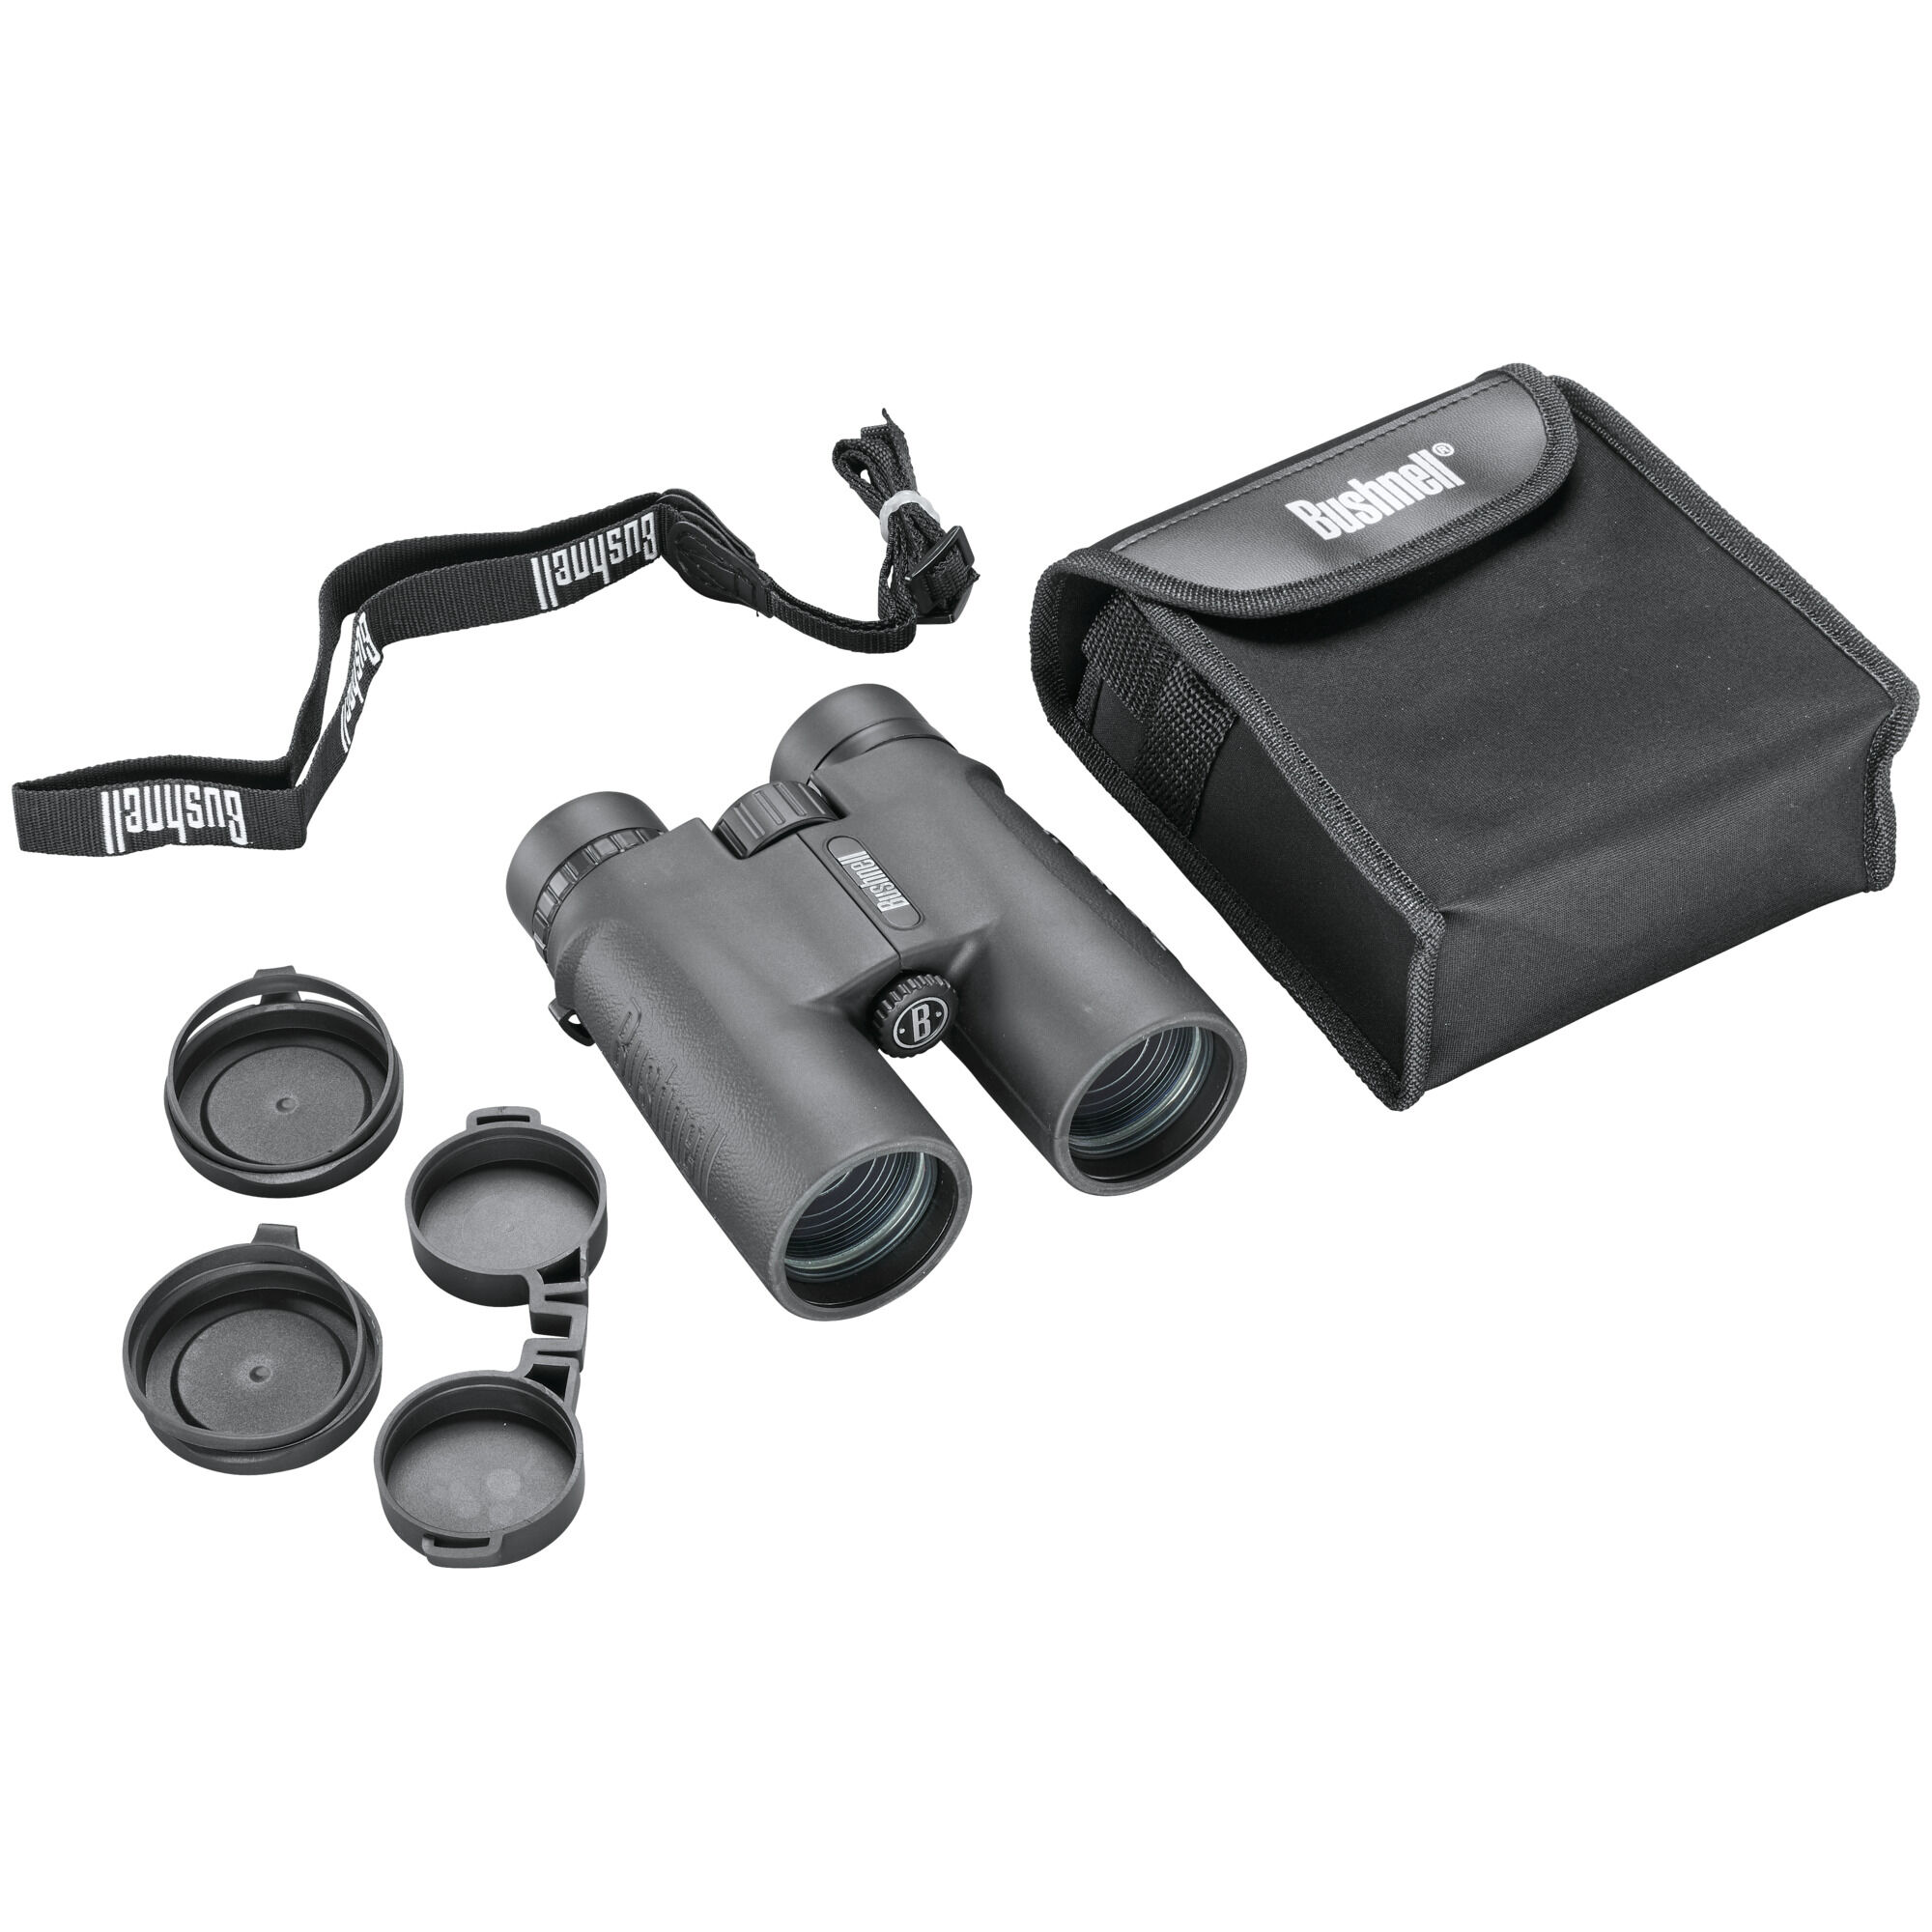 Buy All-Purpose 10x42 Binoculars for BassPro and More | Bushnell